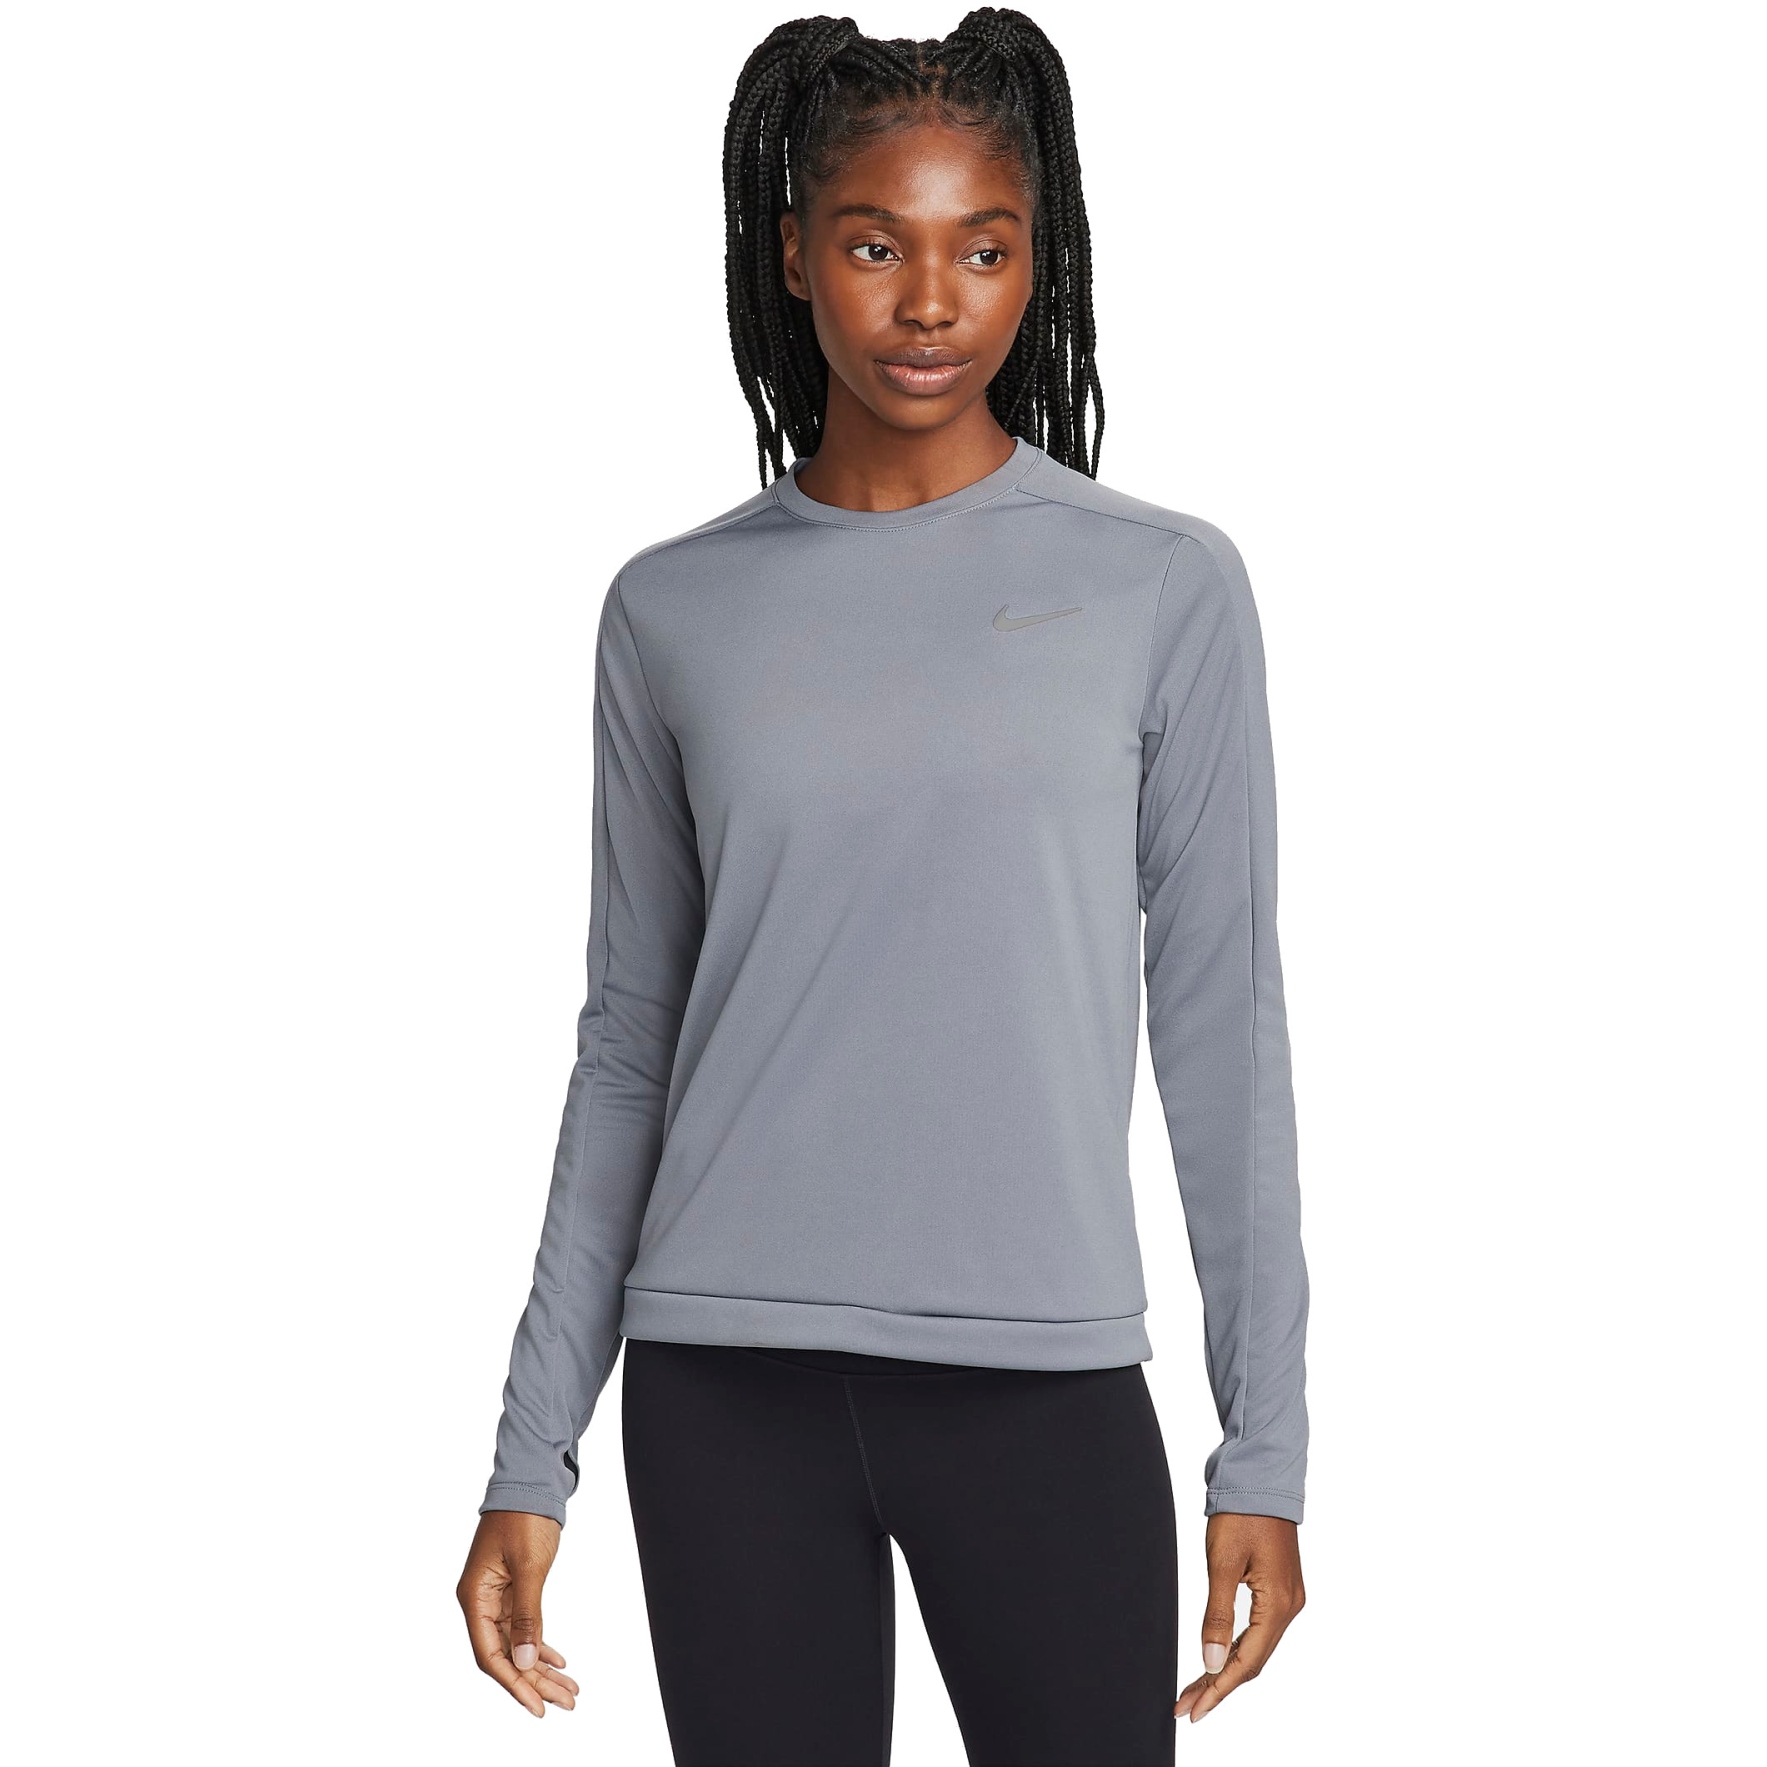 Picture of Nike Dri-FIT Crew-Neck Longsleeve Running Top Women - smoke grey/reflective silver DQ6379-084